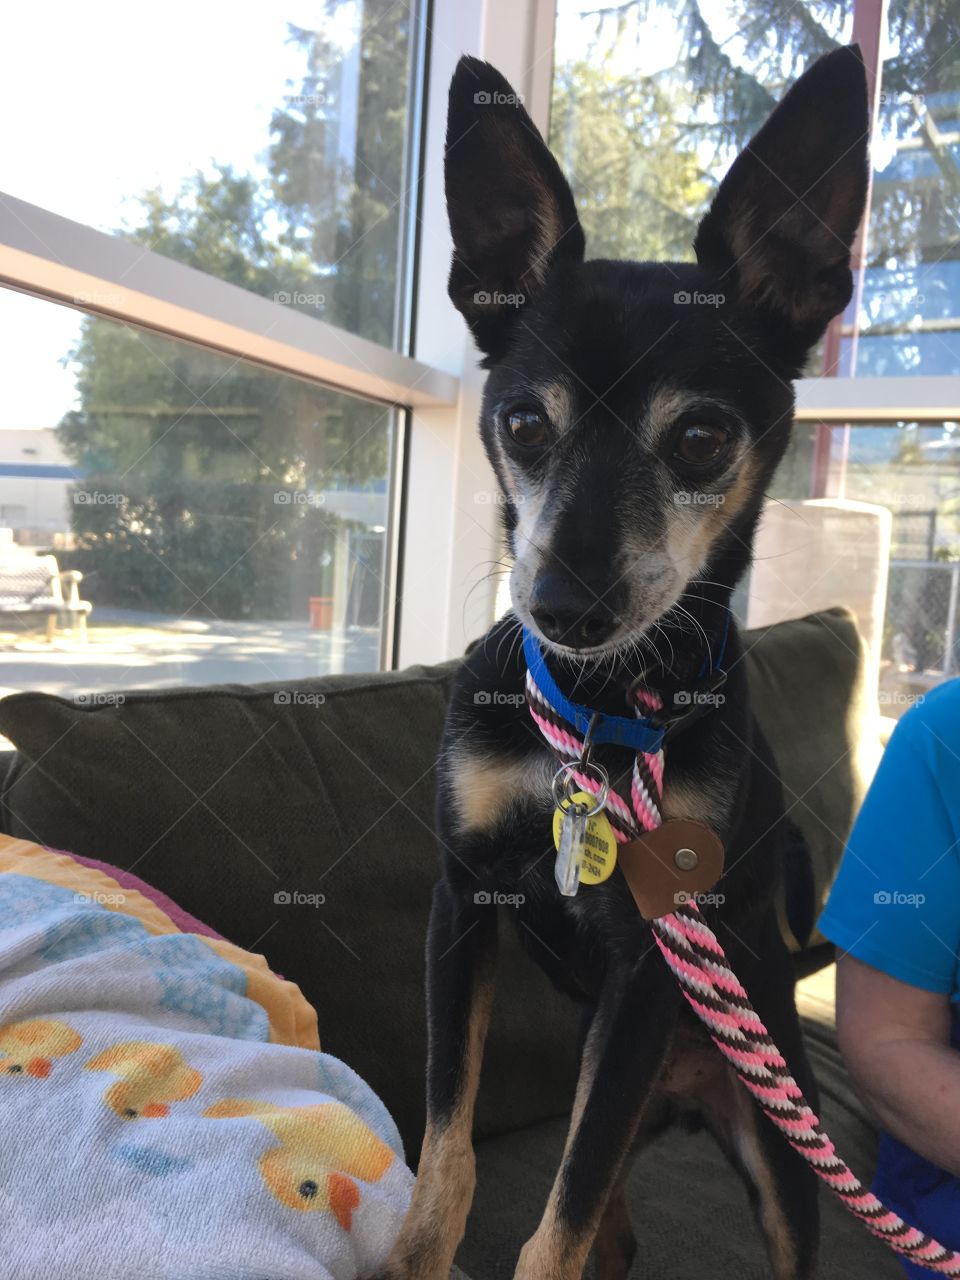 Name: Chico
Senior Chihuahua Mix shelter dog 
Blind, but doesn’t let that slow him down! 